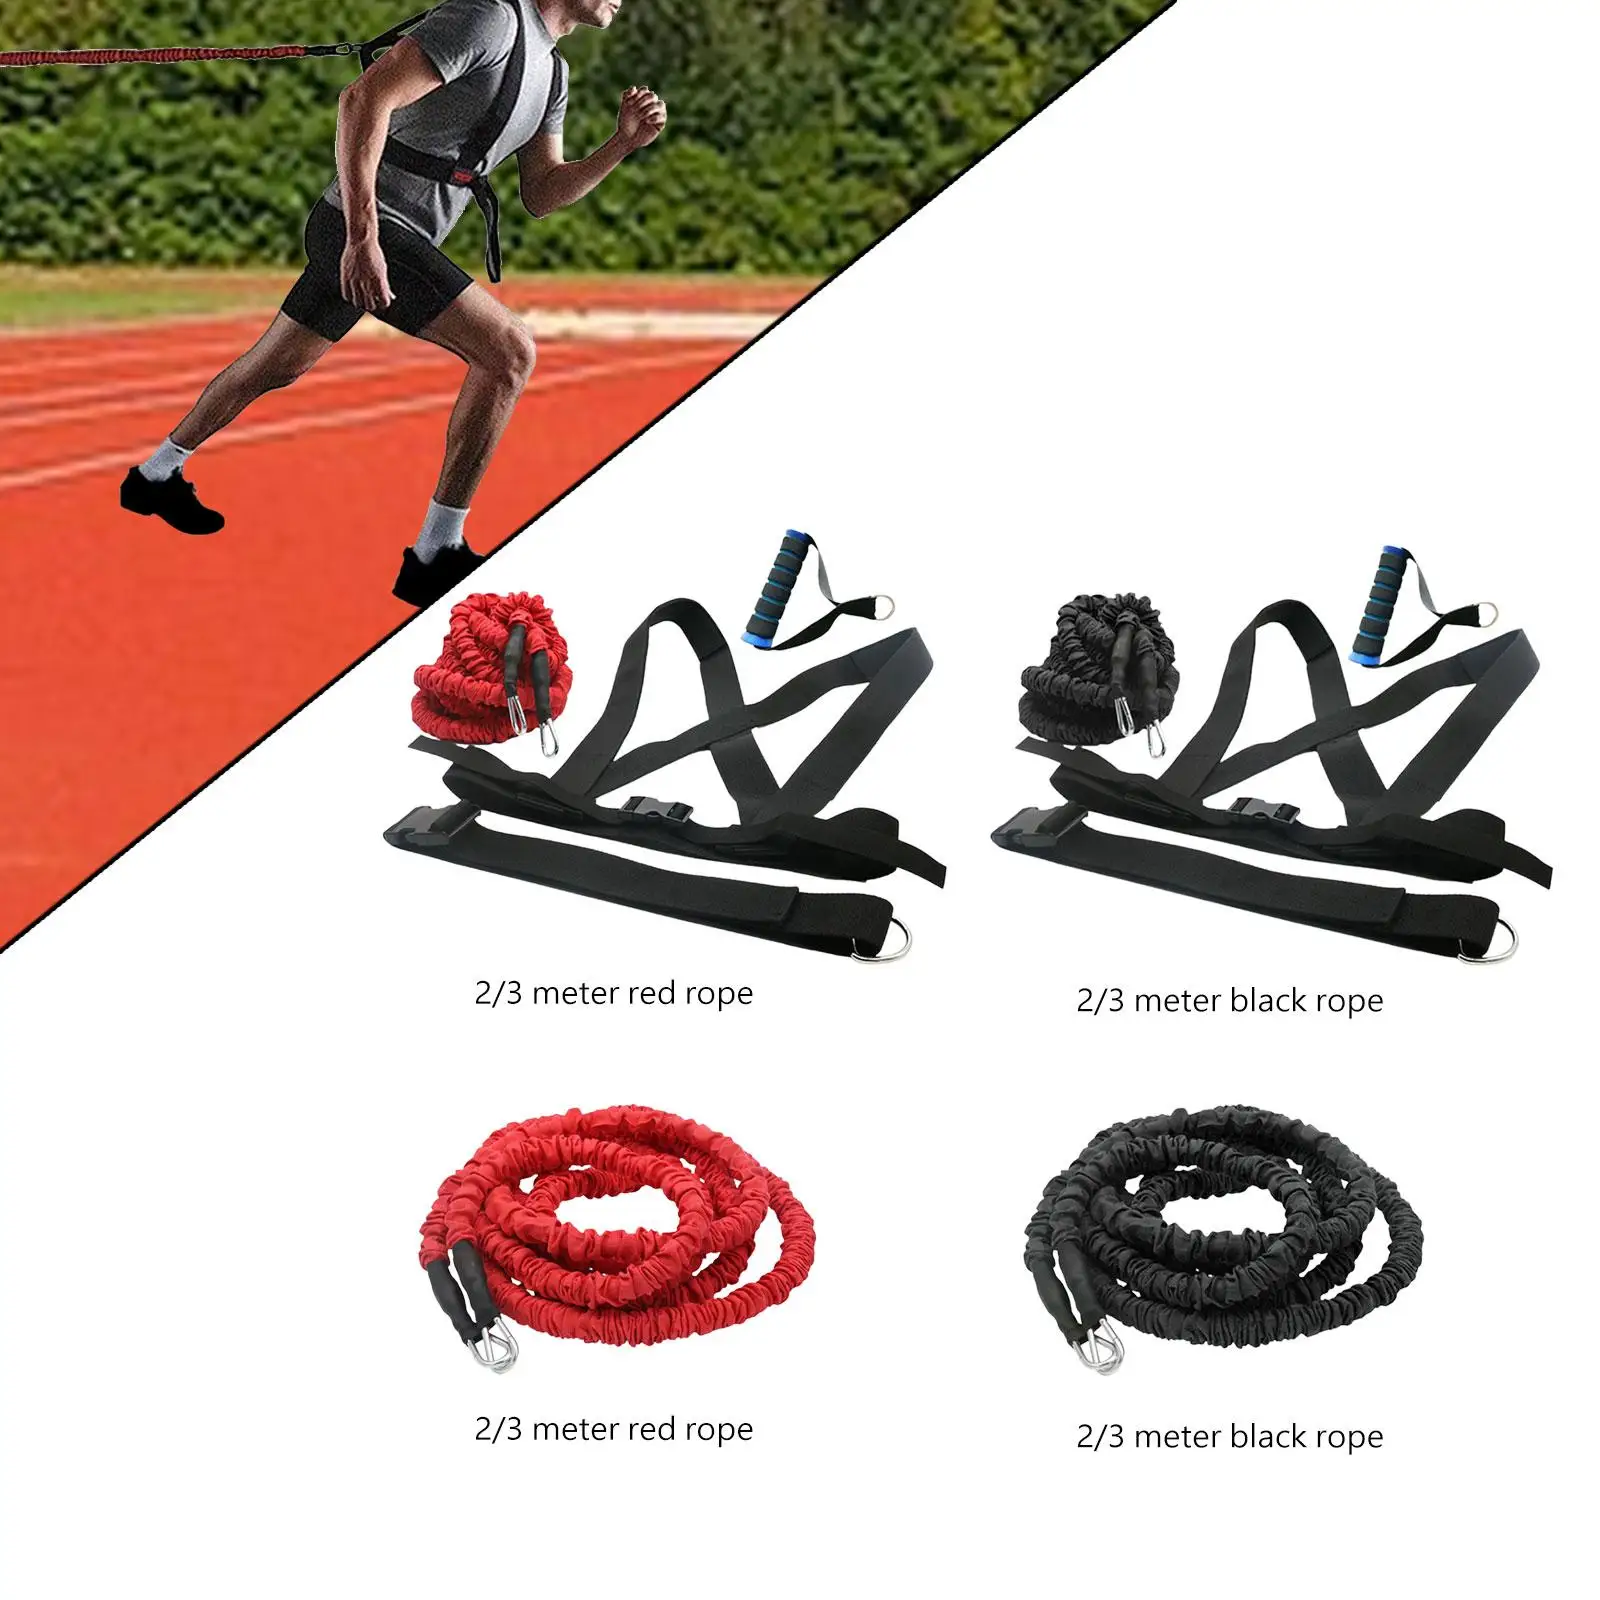 Resistance Training Stretch Band Kits 50lbs Men Women Full Kits for Power Agility Explosive Force Speed Strength Football